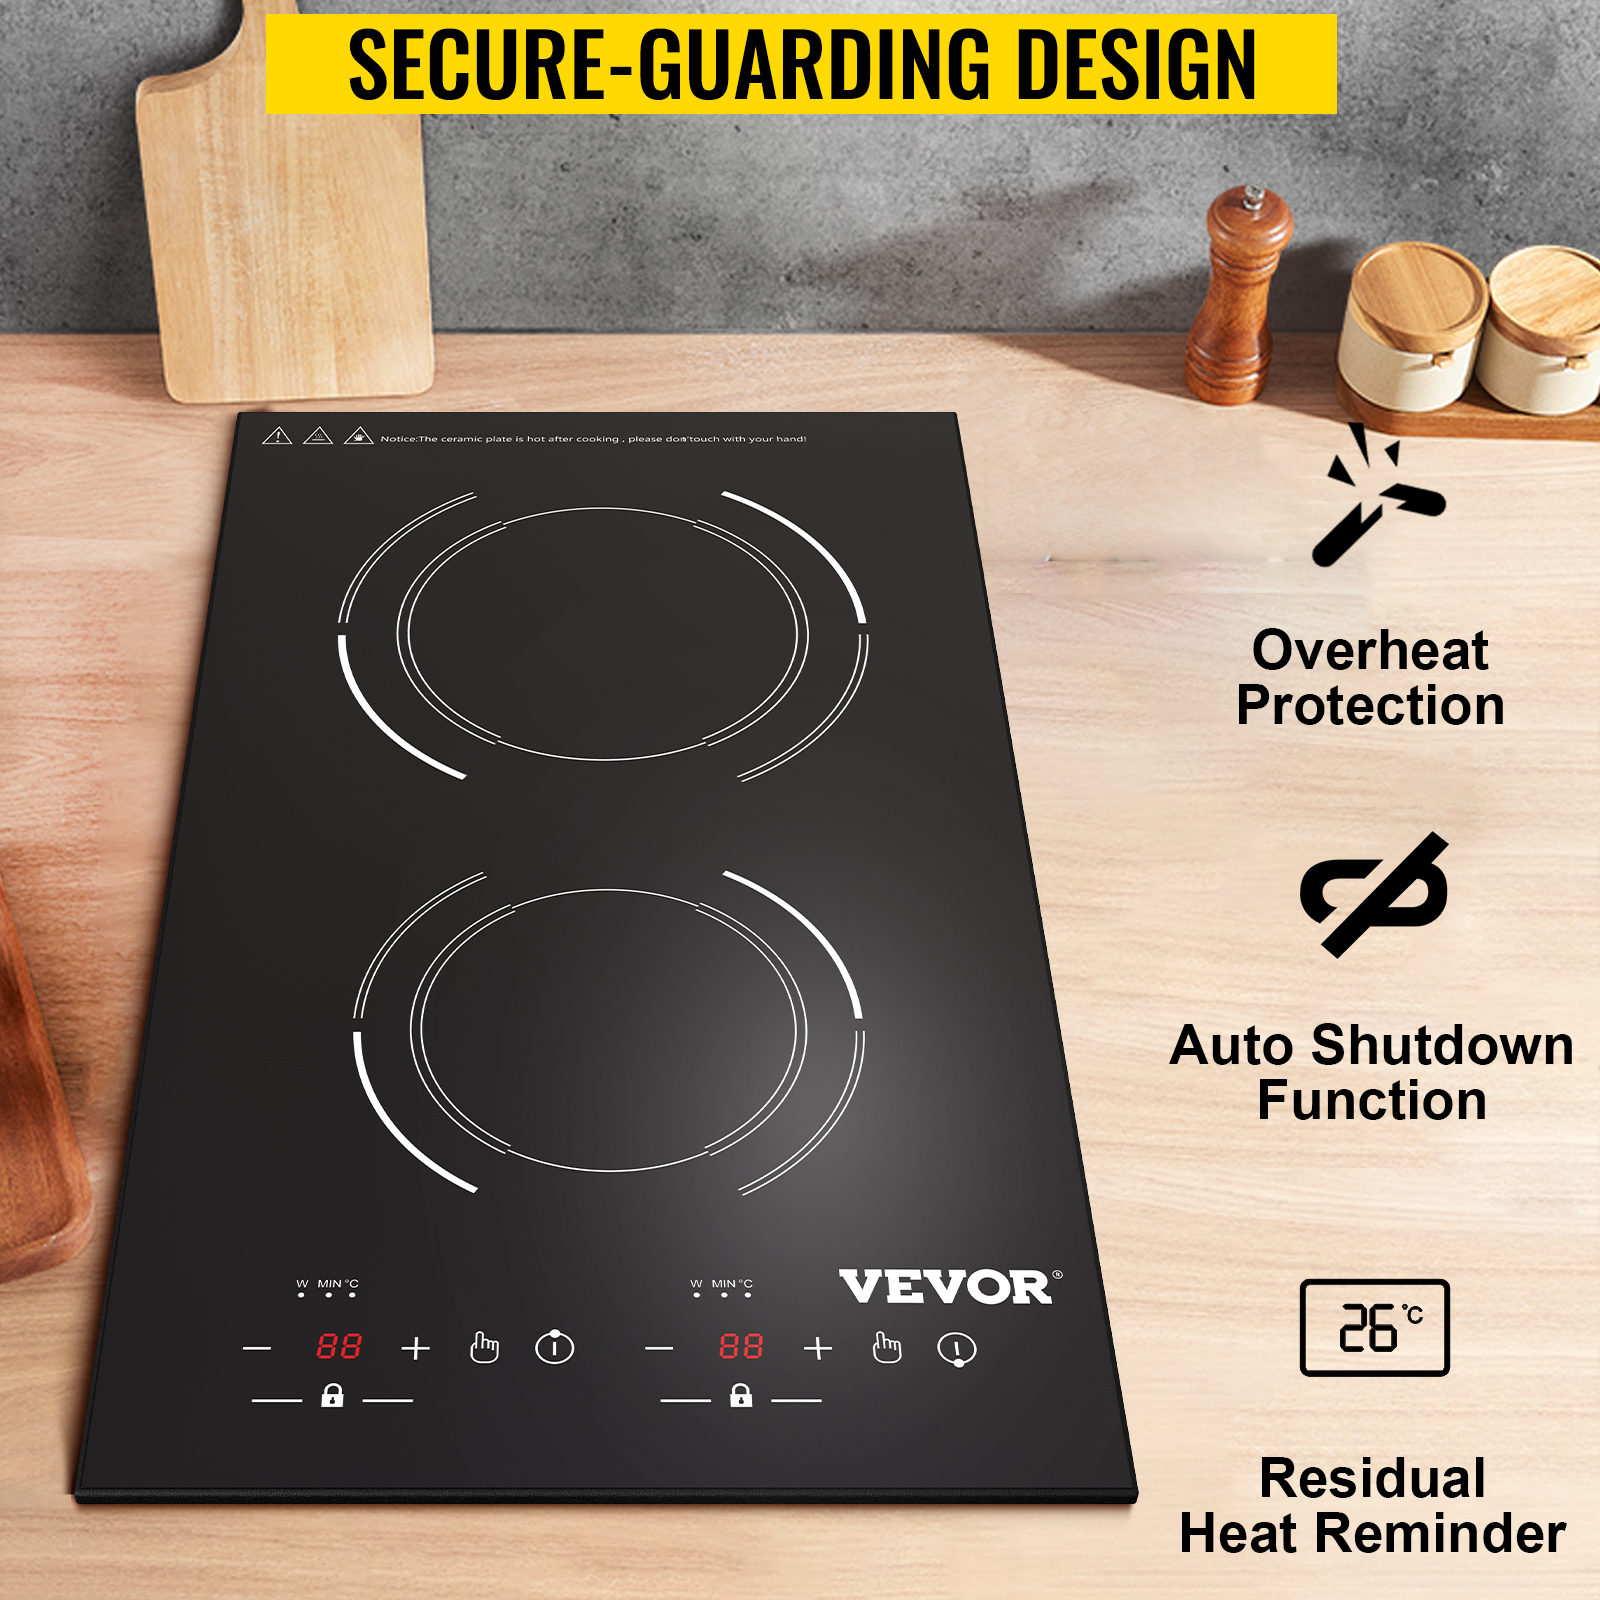 VEVOR Built-in Induction Electric Stove Top 12 Inch,2 Burners Electric Cooktop,9 Power Levels & Sensor Touch Control,Easy to Clean Ceramic Glass Surface,Child Safety Lock,110V 